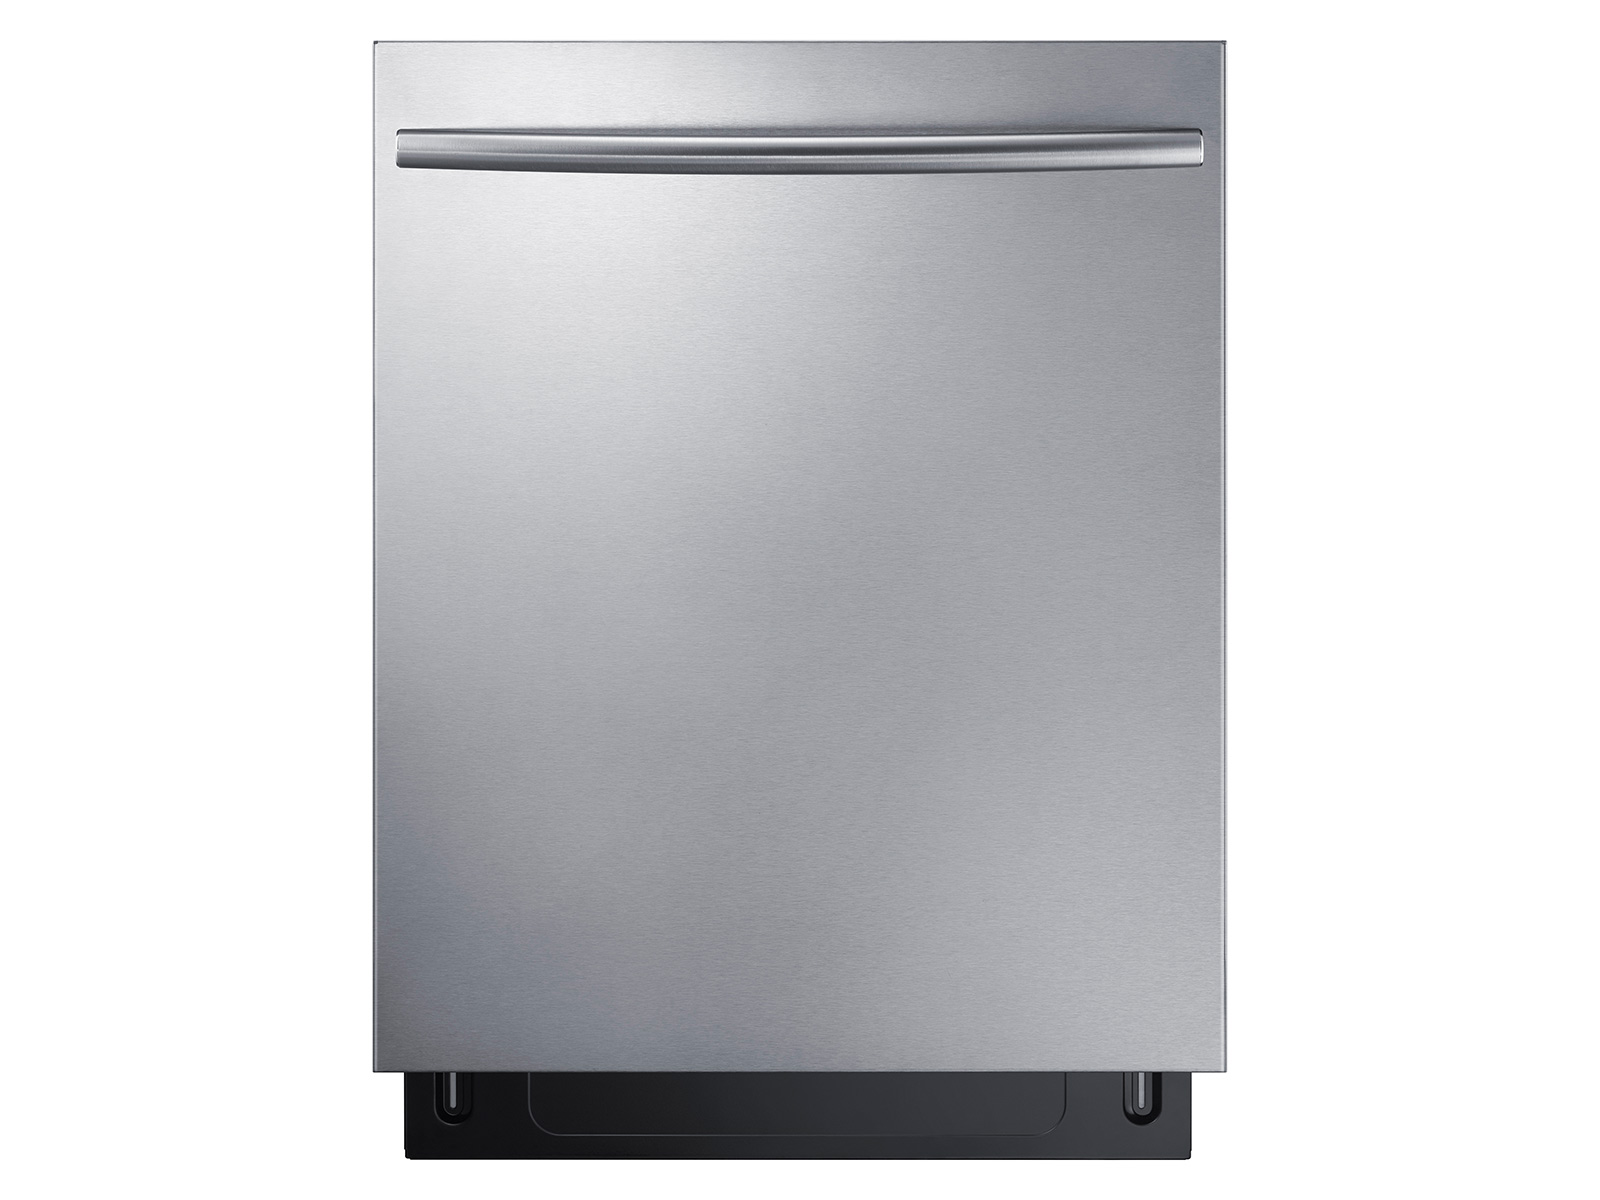 StormWash™ Dishwasher with Top 